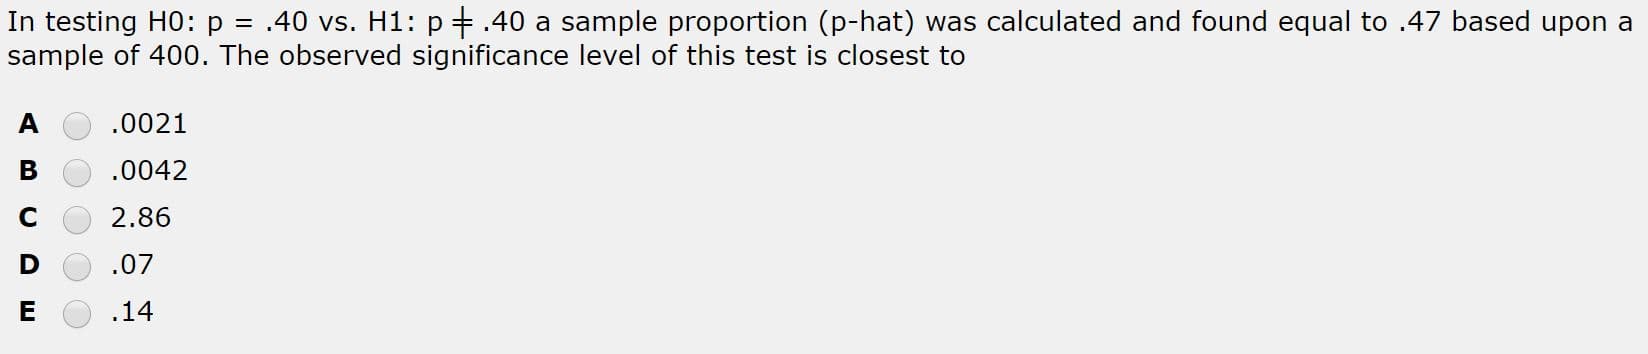 In testing H0: p = .40 vs. H1: p+.40 a sample proportion (p-hat) was calculated and found equal to .47 based upon a
sample of 400. The observed significance level of this test is closest to
.0021
.0042
2.86
.07
.14
ם
